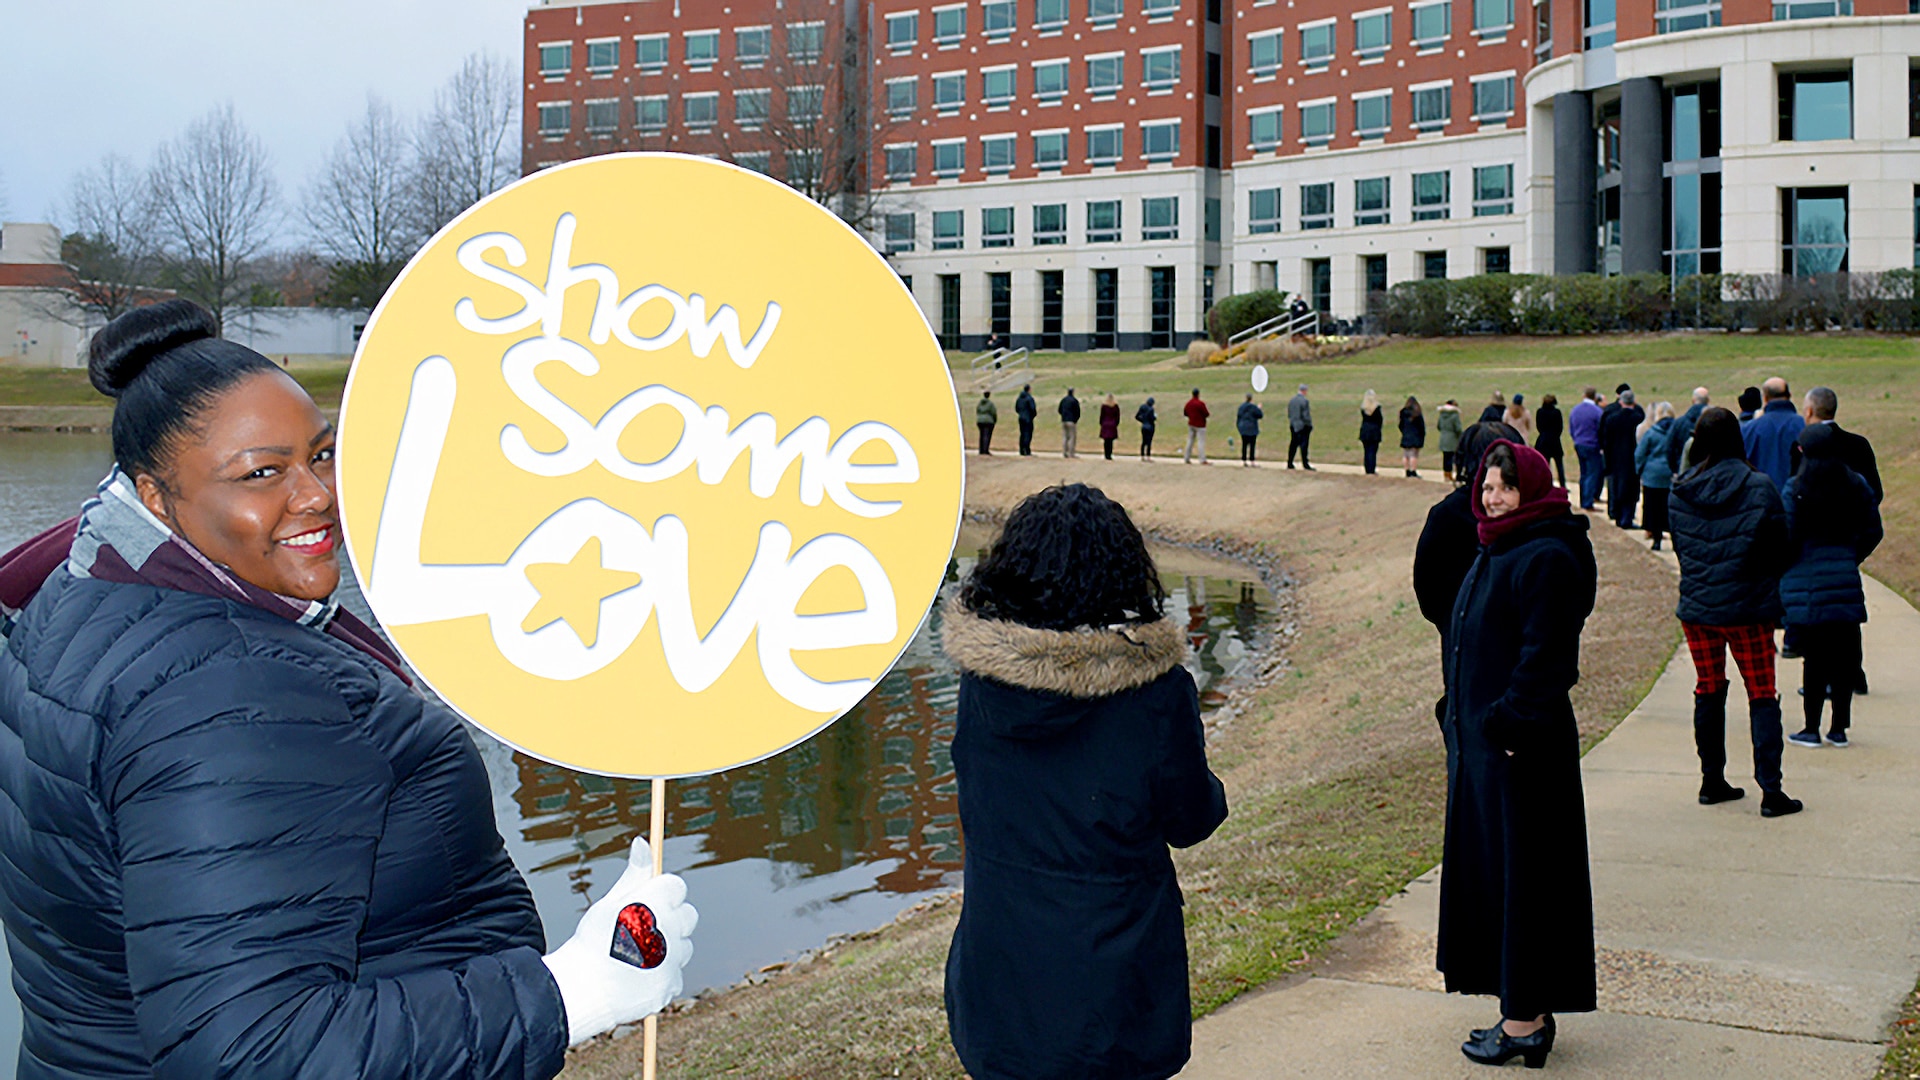 Woman in blue coat holds up a "Show Some Love" sign during an event at the McNamara Headquarters Complex pond at the agency’s Fort Belvoir, Virginia, headquarters.